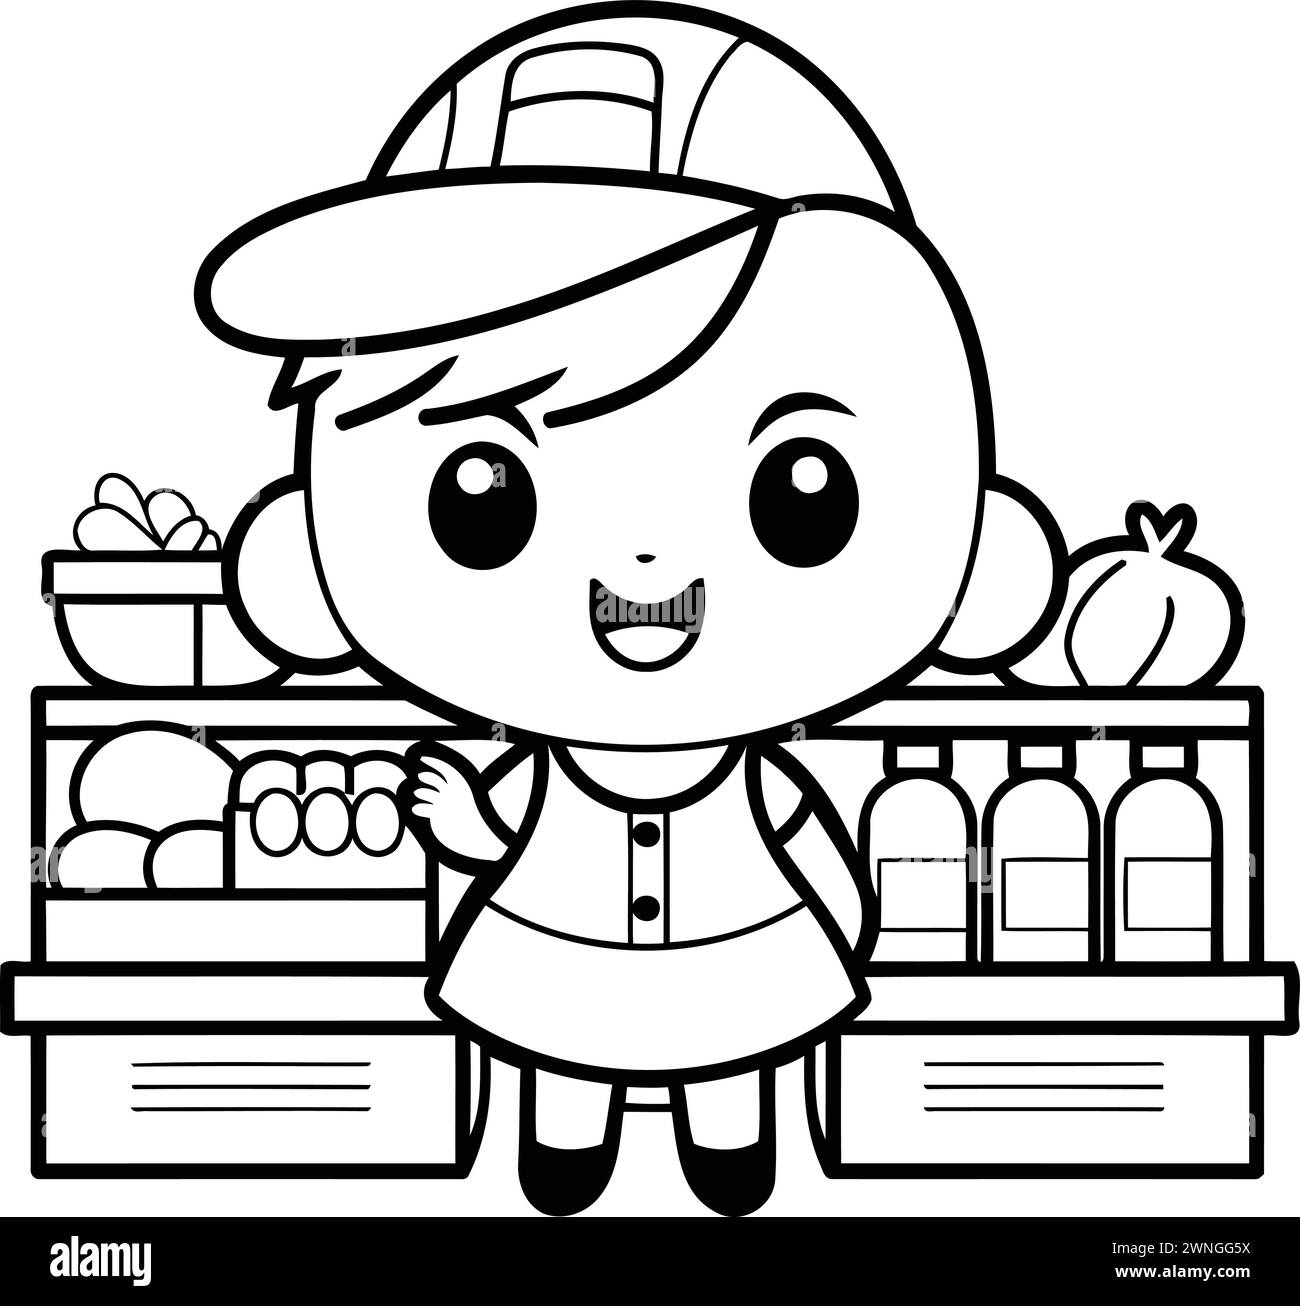 Coloring Page Outline Of Cartoon Delivery Girl With Groceries Stock Vector